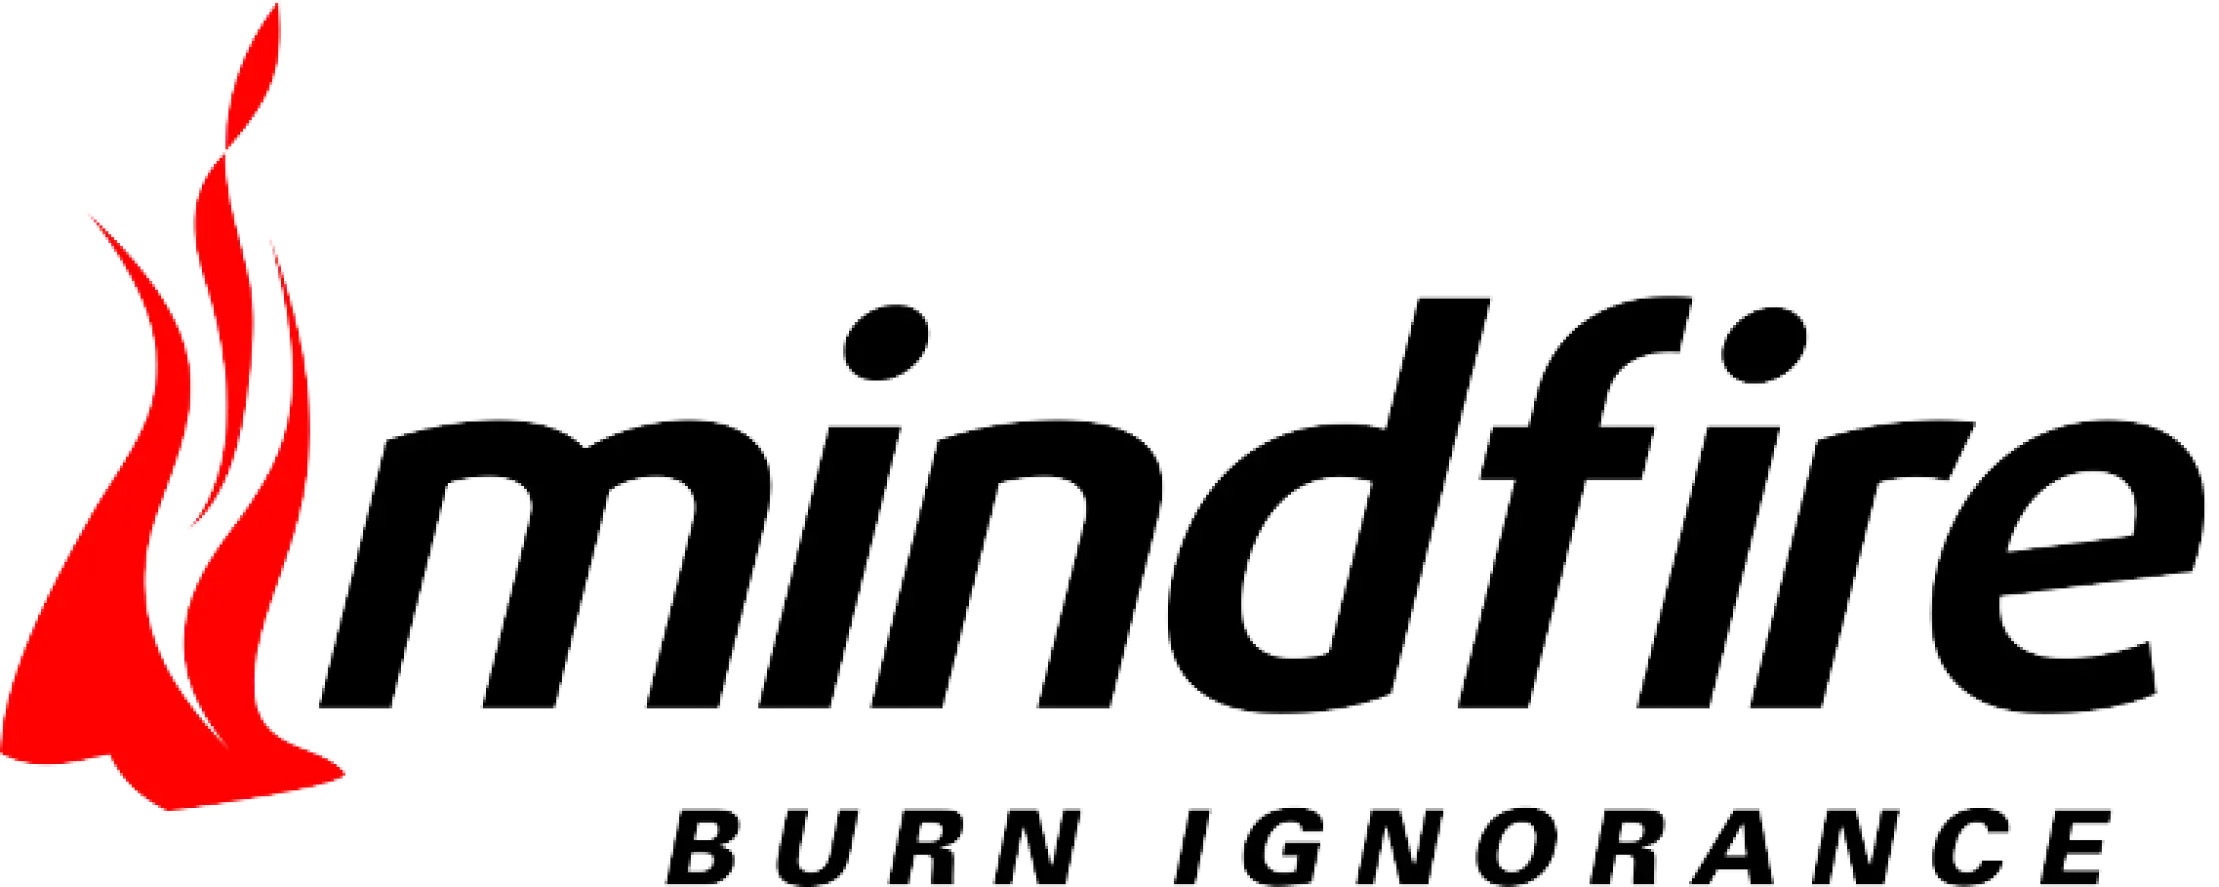 Mindfire Solutions